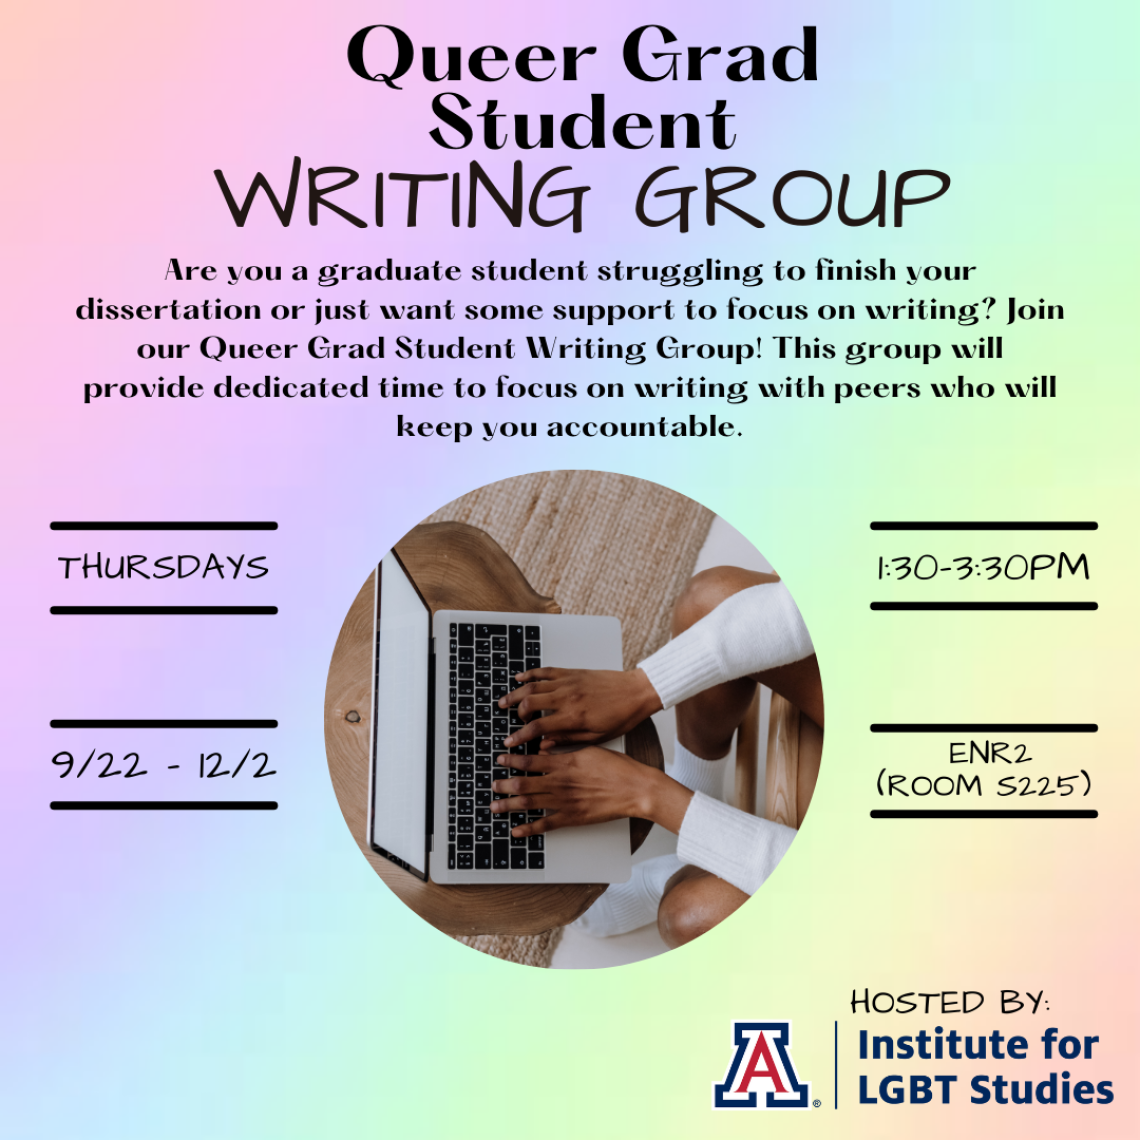 Pastel rainbow background with black text: Queer Grad Student Writing Group. Are you a graduate student struggling to finish your dissertation or just want some support to focus on writing? Join our Queer Grad Student Writing Group! This Group will provided dedicated time to focus on writing with peers who will help keep you accountable. Thursdays 9/22-12/2 1:30-3:30pm in ENR2 Room S225